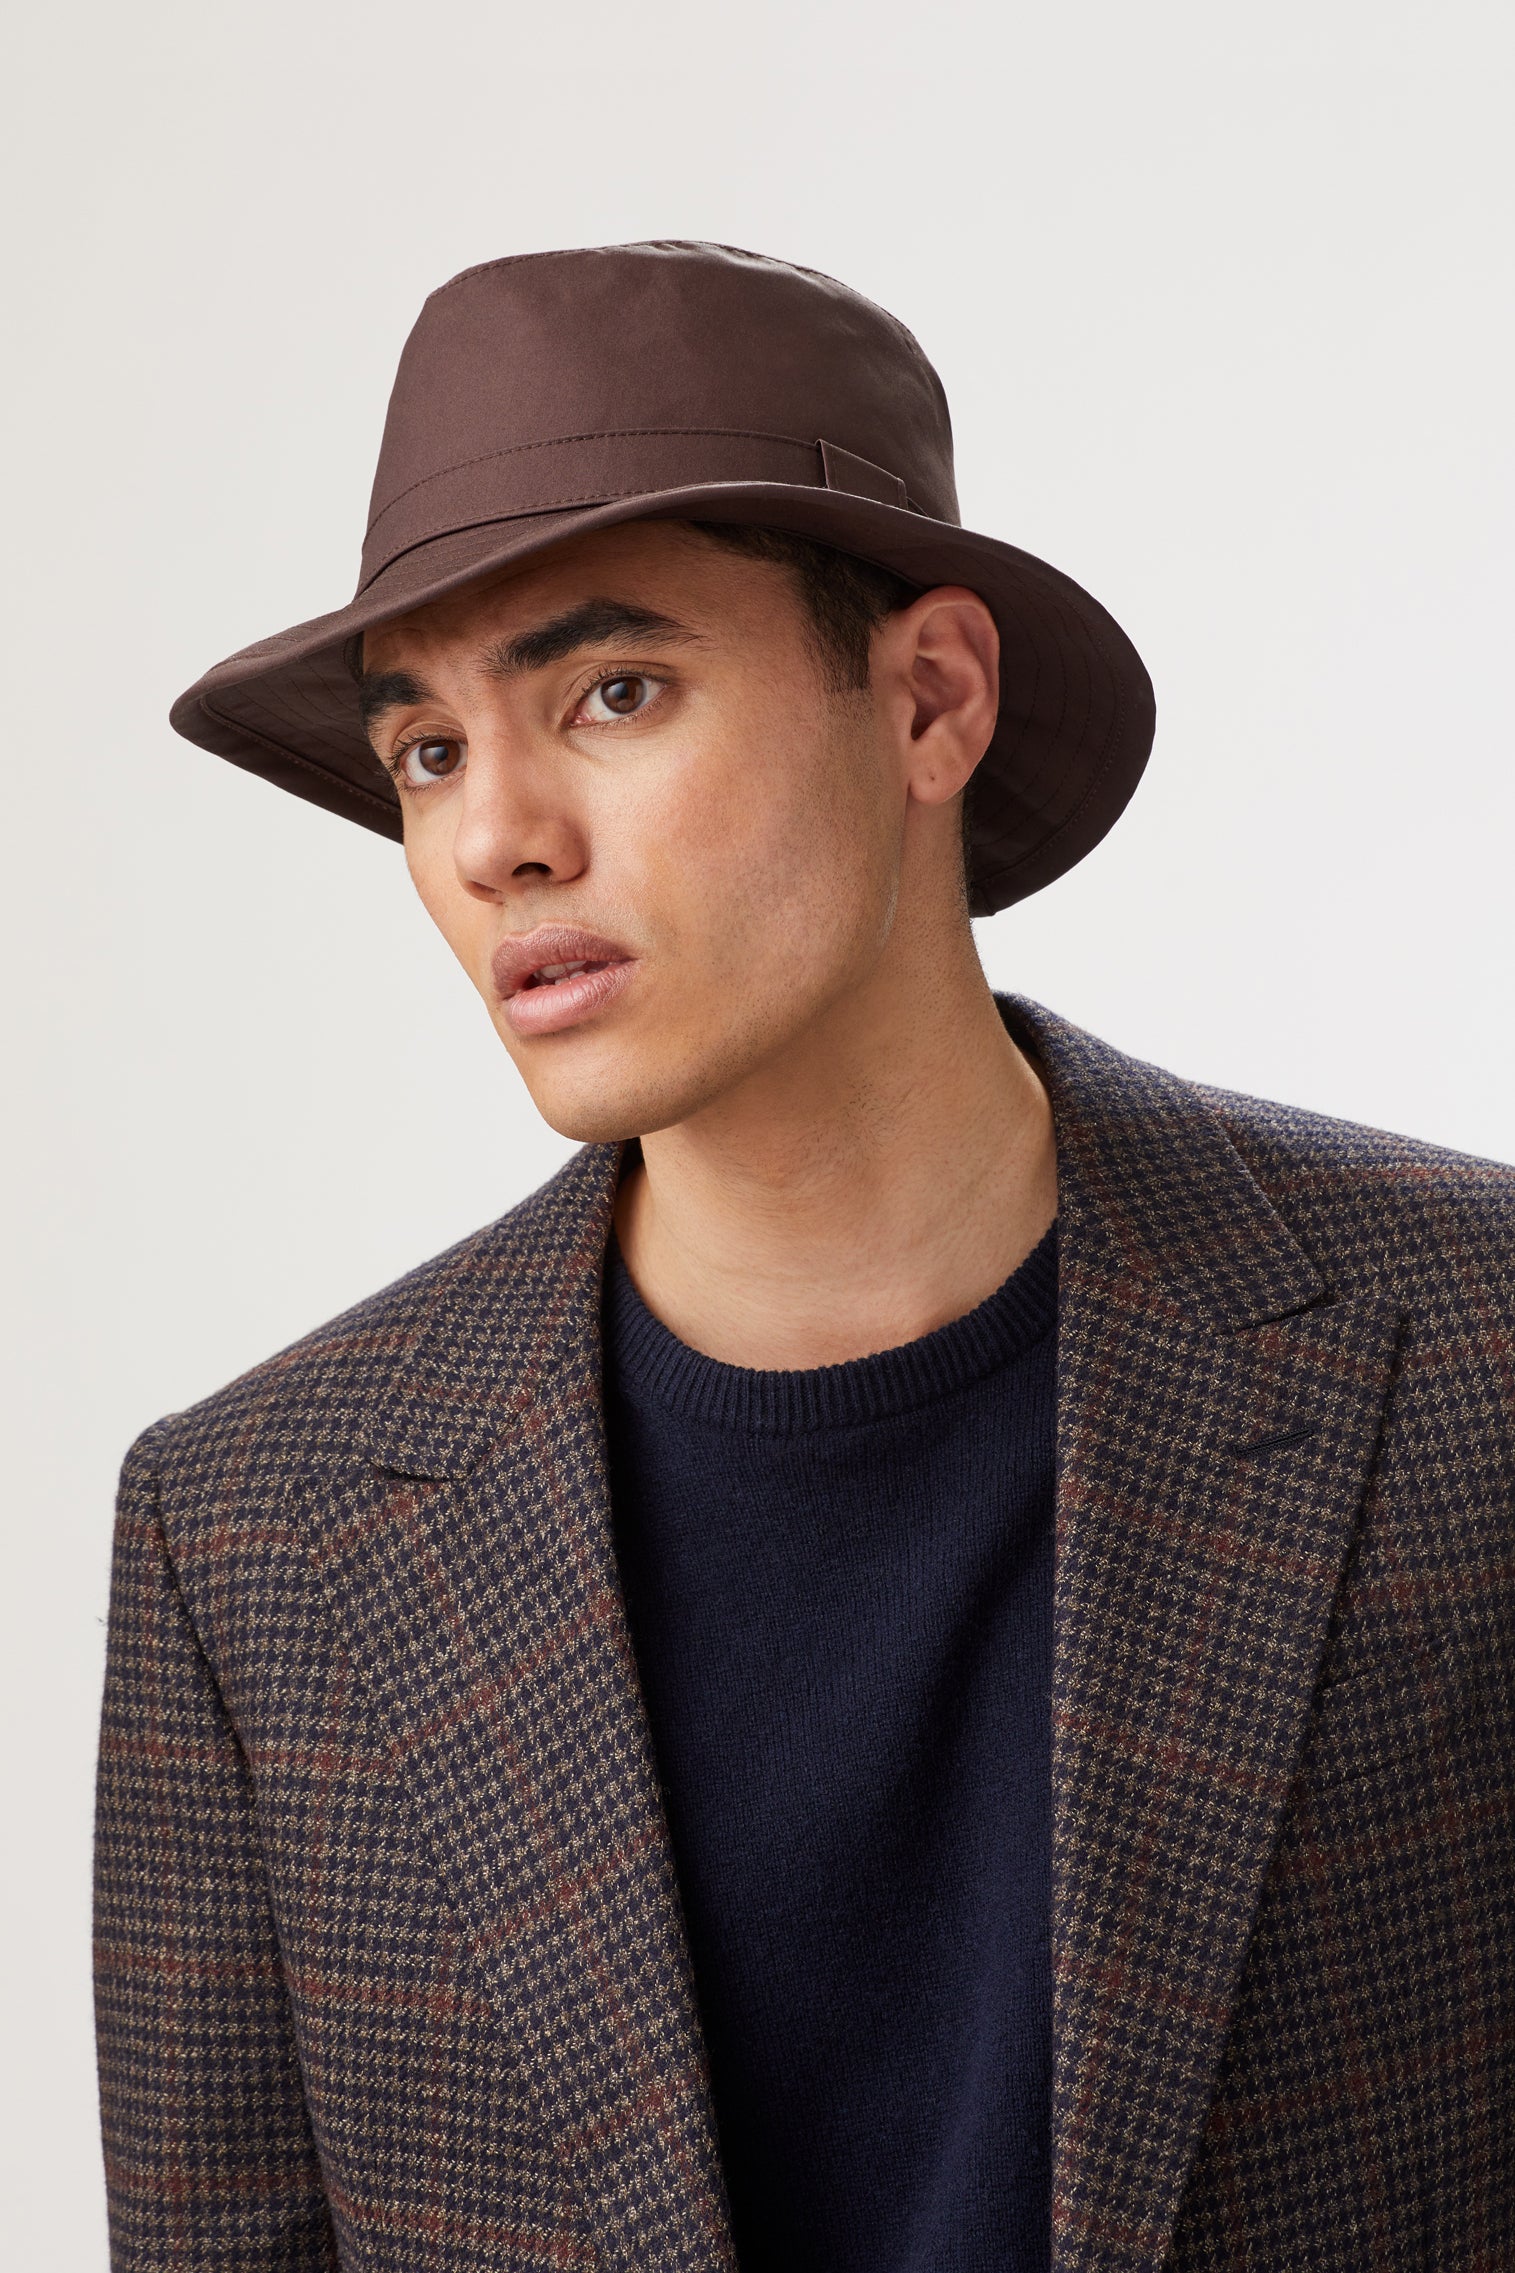 Tay GORE-TEX Hat - Hats for Oval Face Shapes - Lock & Co. Hatters London UK